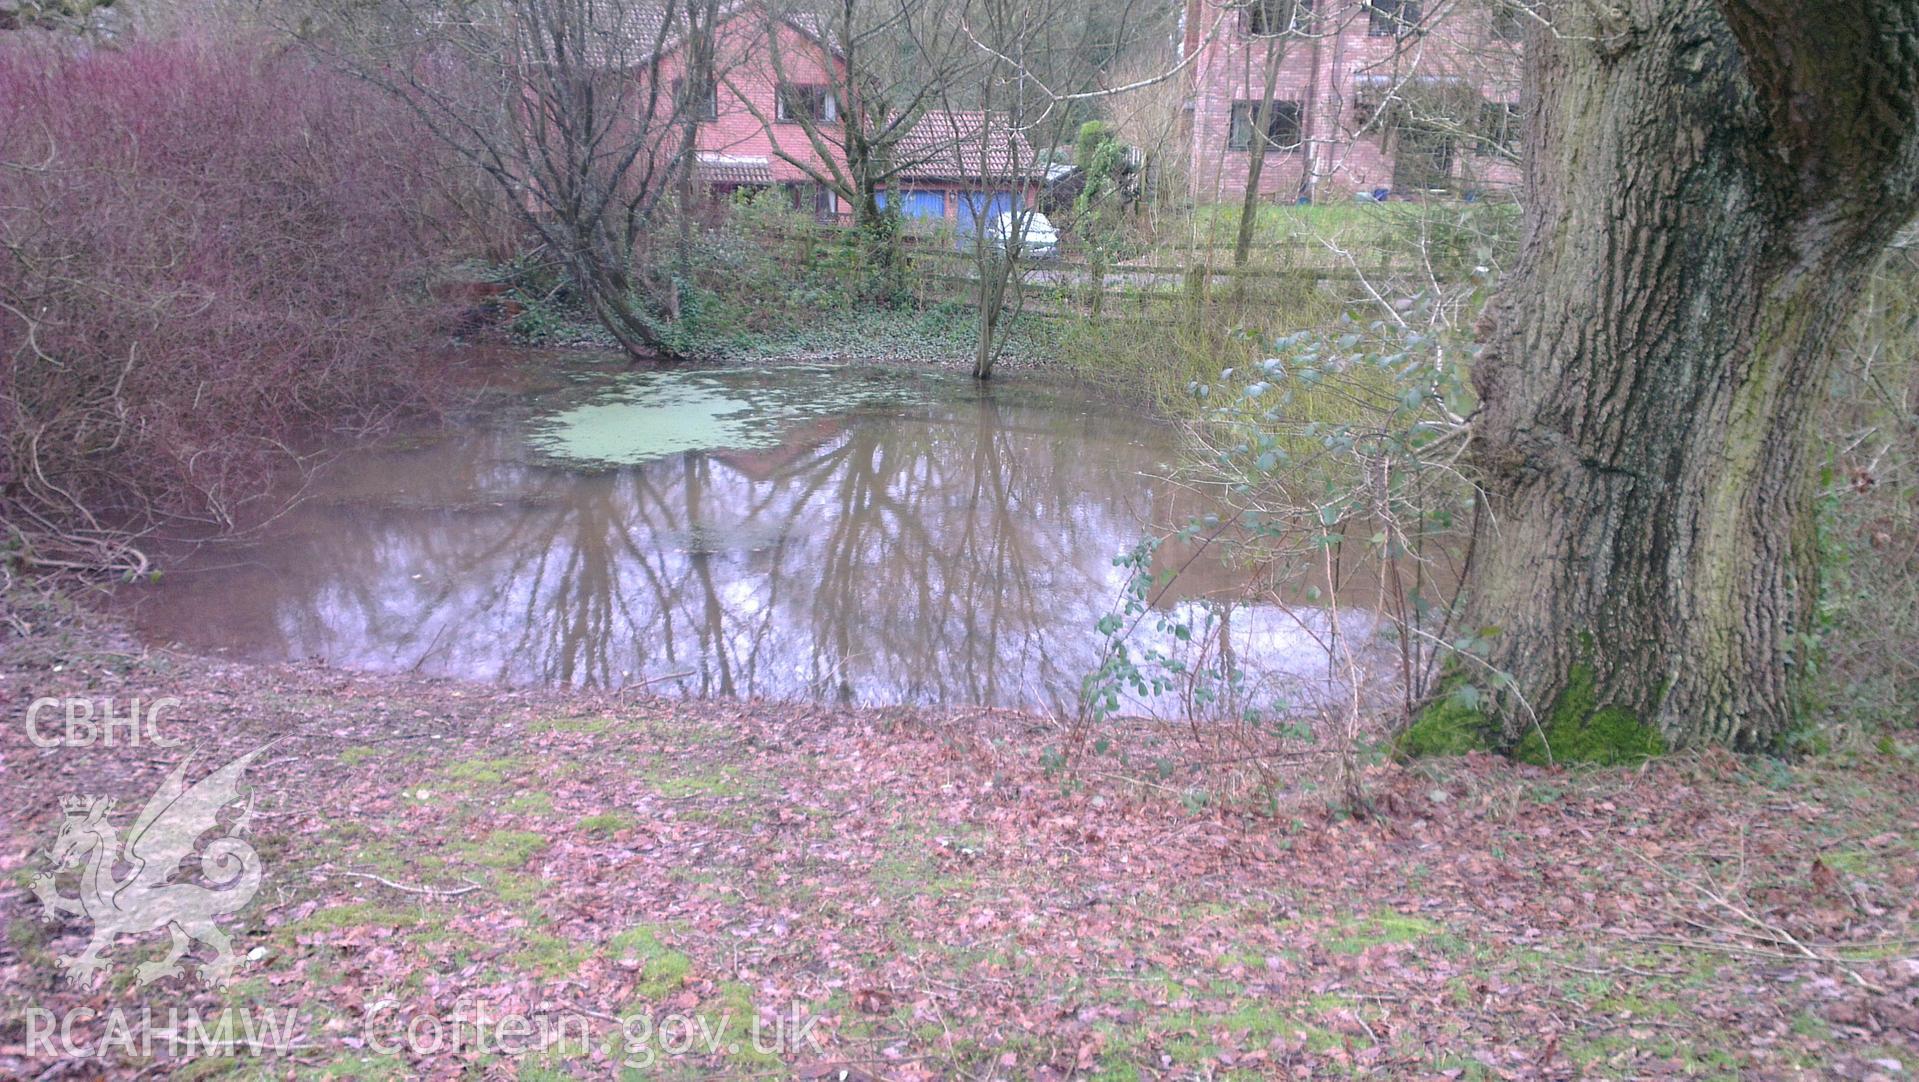 Digital colour photograph of the Castle Oak Pond, near Pwllmelyn battlefield. Photographed during Phase Three of the Welsh Battlefield Metal Detector Survey, carried out by Archaeology Wales, 2012-2014. Project code: 2041 - WBS/12/SUR.